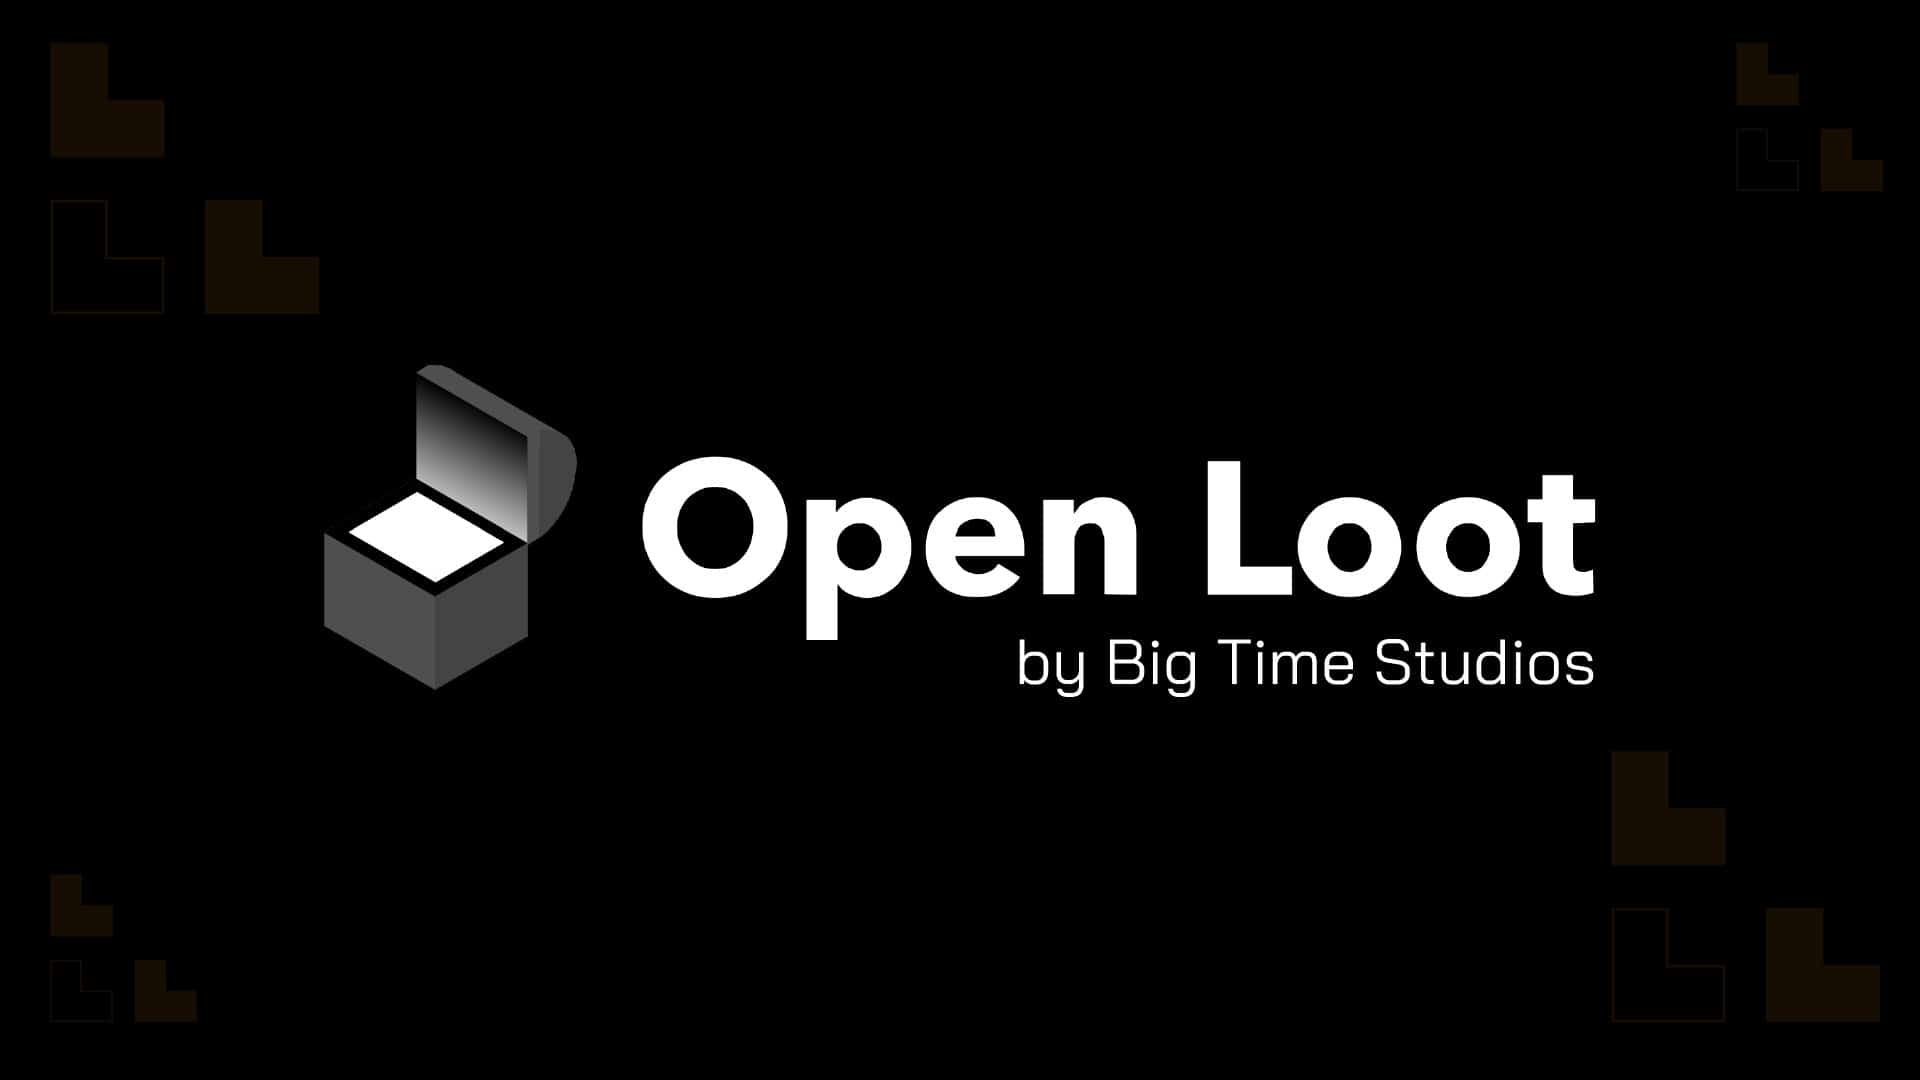 Big-time-studios-announces-open-loot-platform-and-gaming-fund